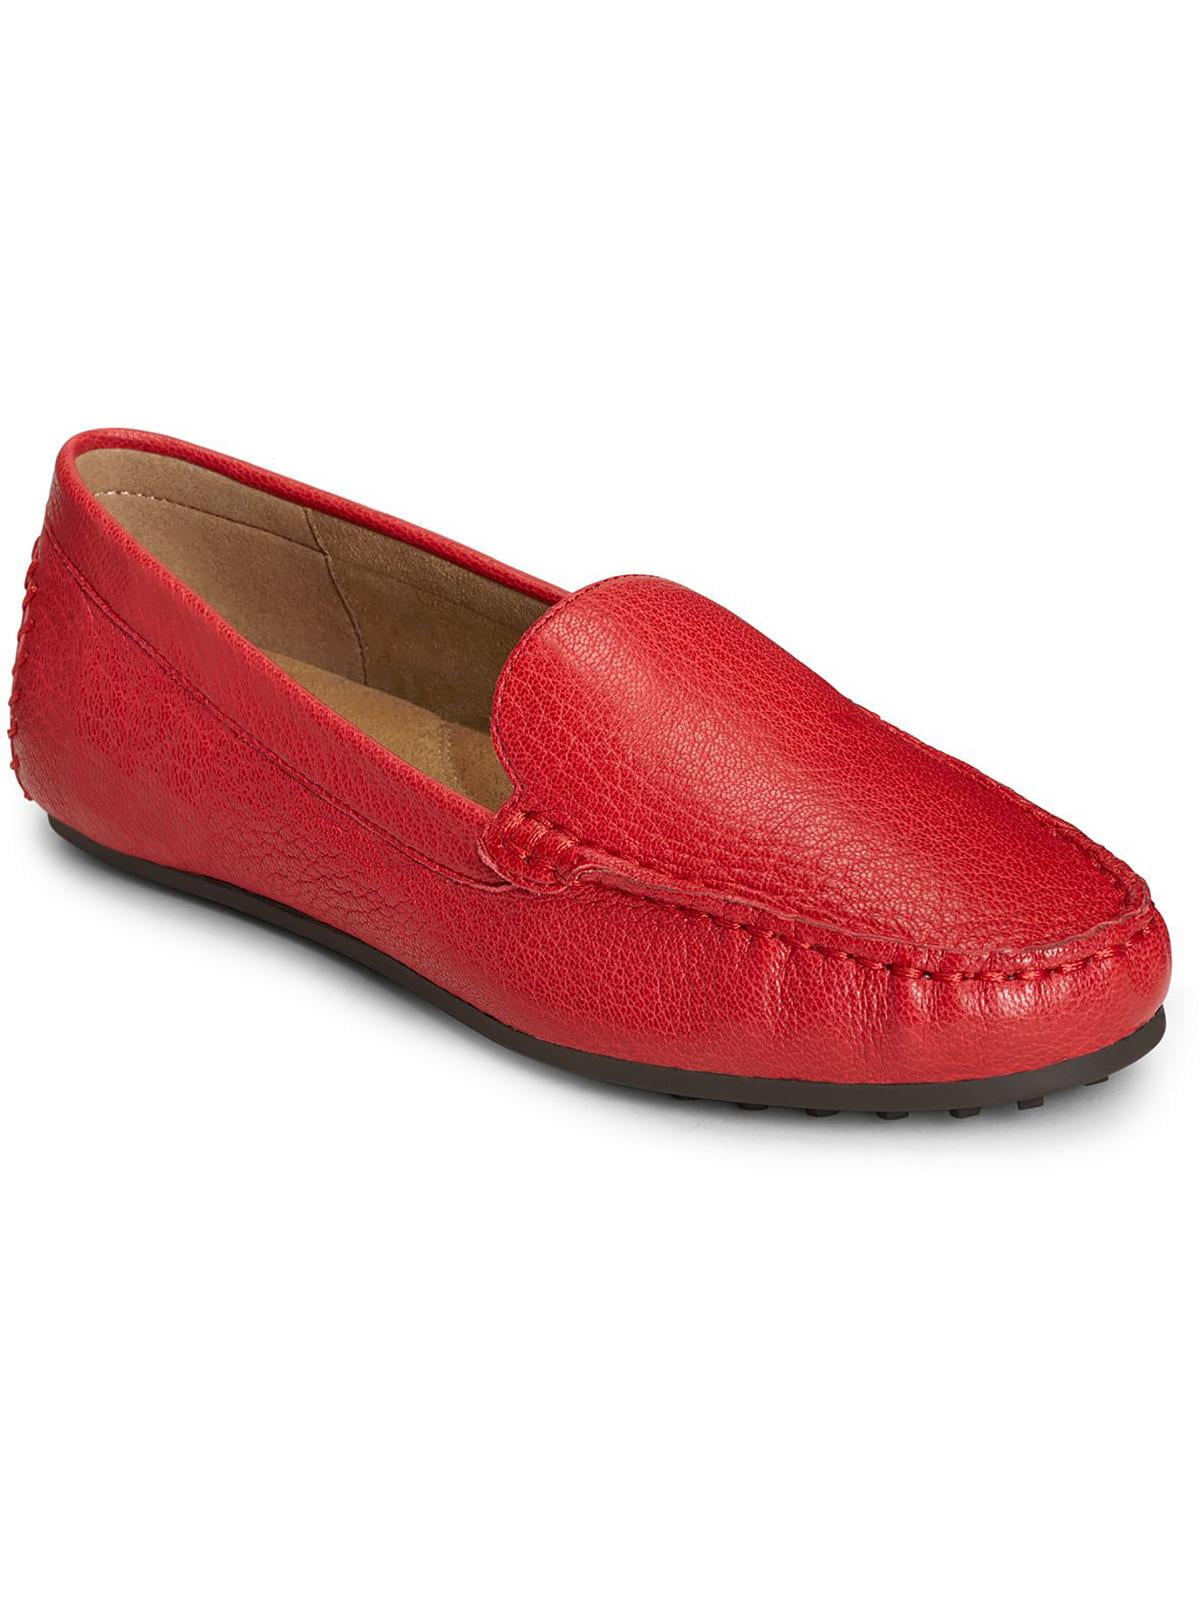 Aerosoles Womens Over Drive Loafer Perforated Driving Moccasins ...